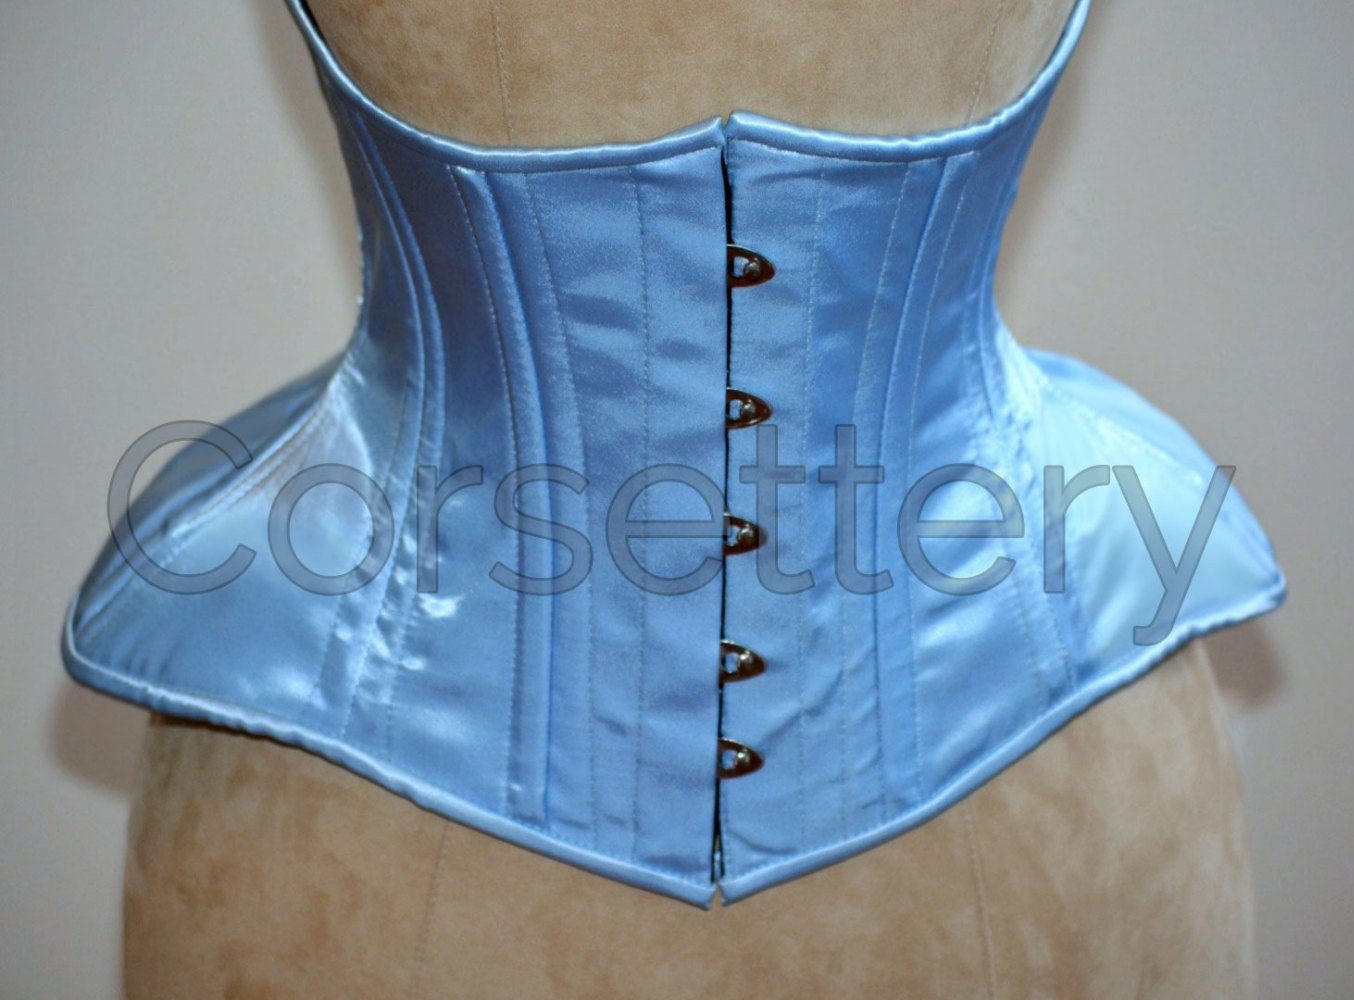 Very wide hips double row steel boned underbust corset from satin. Real waist training corset for tight lacing. Gothic, steampunk corset Corsettery